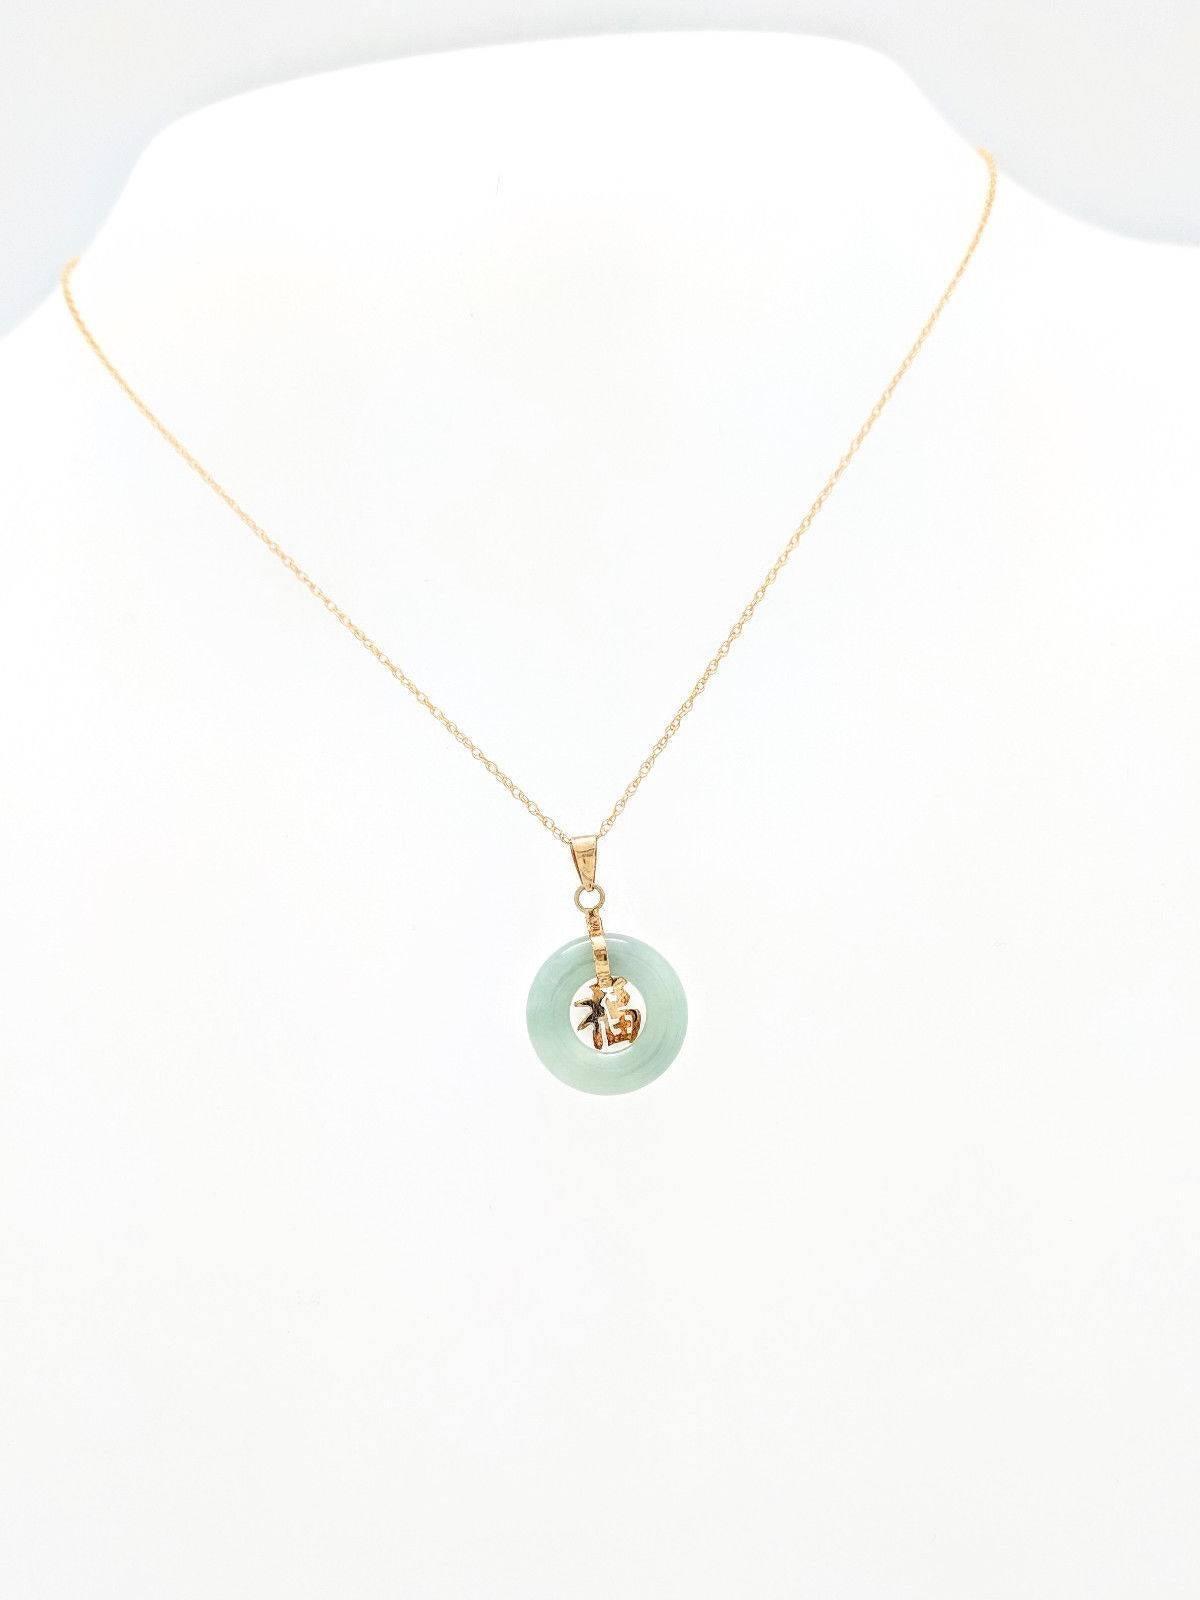 Ladies 14k Yellow Gold Green Jade Pendant Necklace 1.7 Grams

You are viewing a Beautiful Green Jade Pendant Necklace. This piece is crafted from 14k yellow gold and weighs 1.7 grams. This pendant measures 13mm in diameter. It hangs beautifully on a